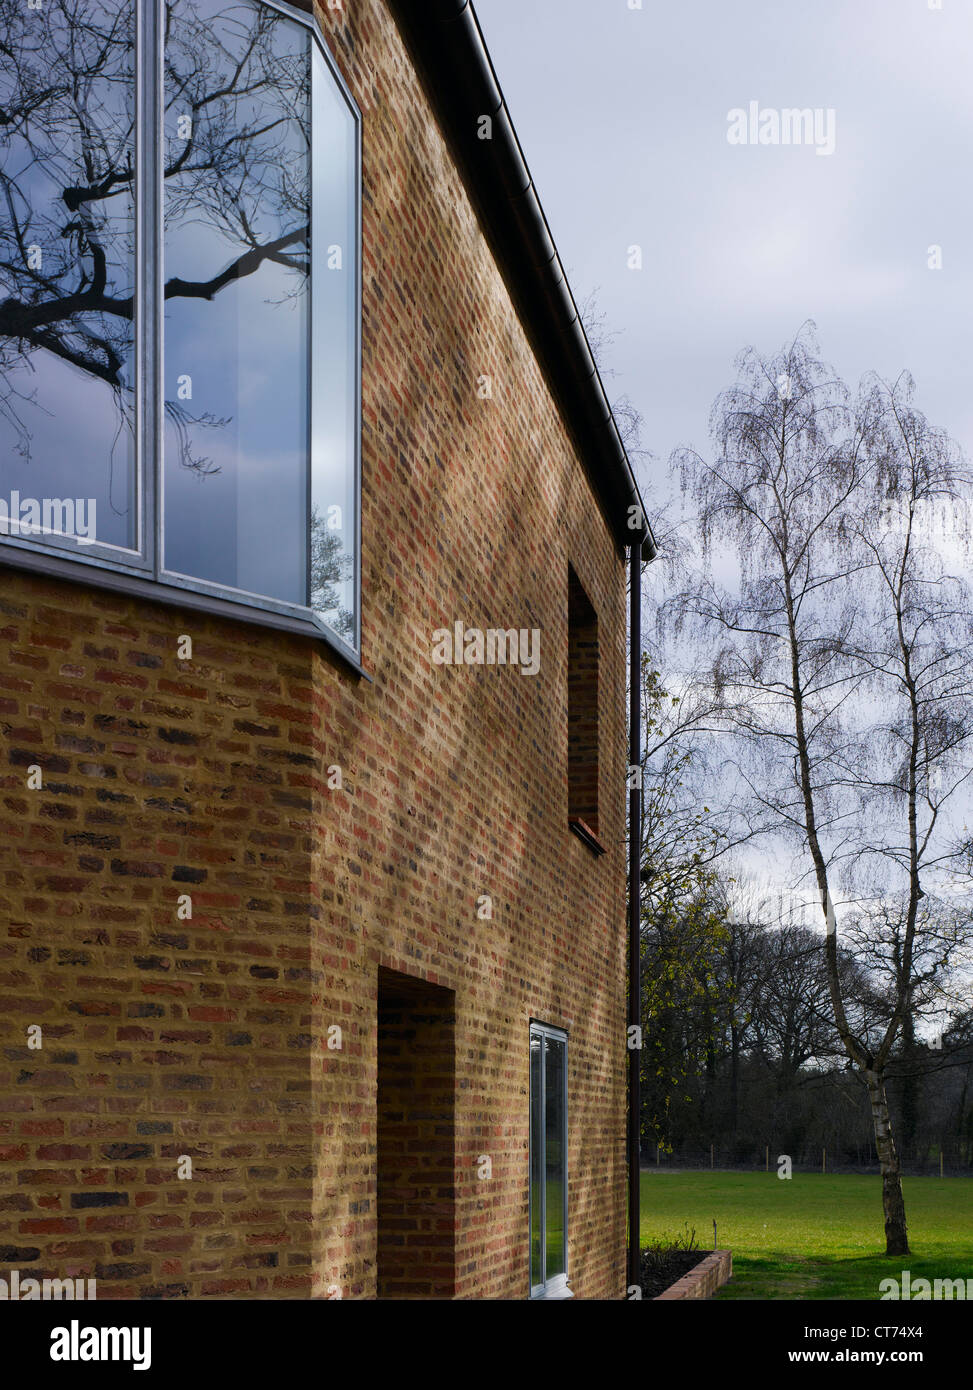 Four Oaks Brick House in the Country, Hungerford, United Kingdom. Architect: Stephen Taylor Architects and ZMMA, 2012. Masoned f Stock Photo